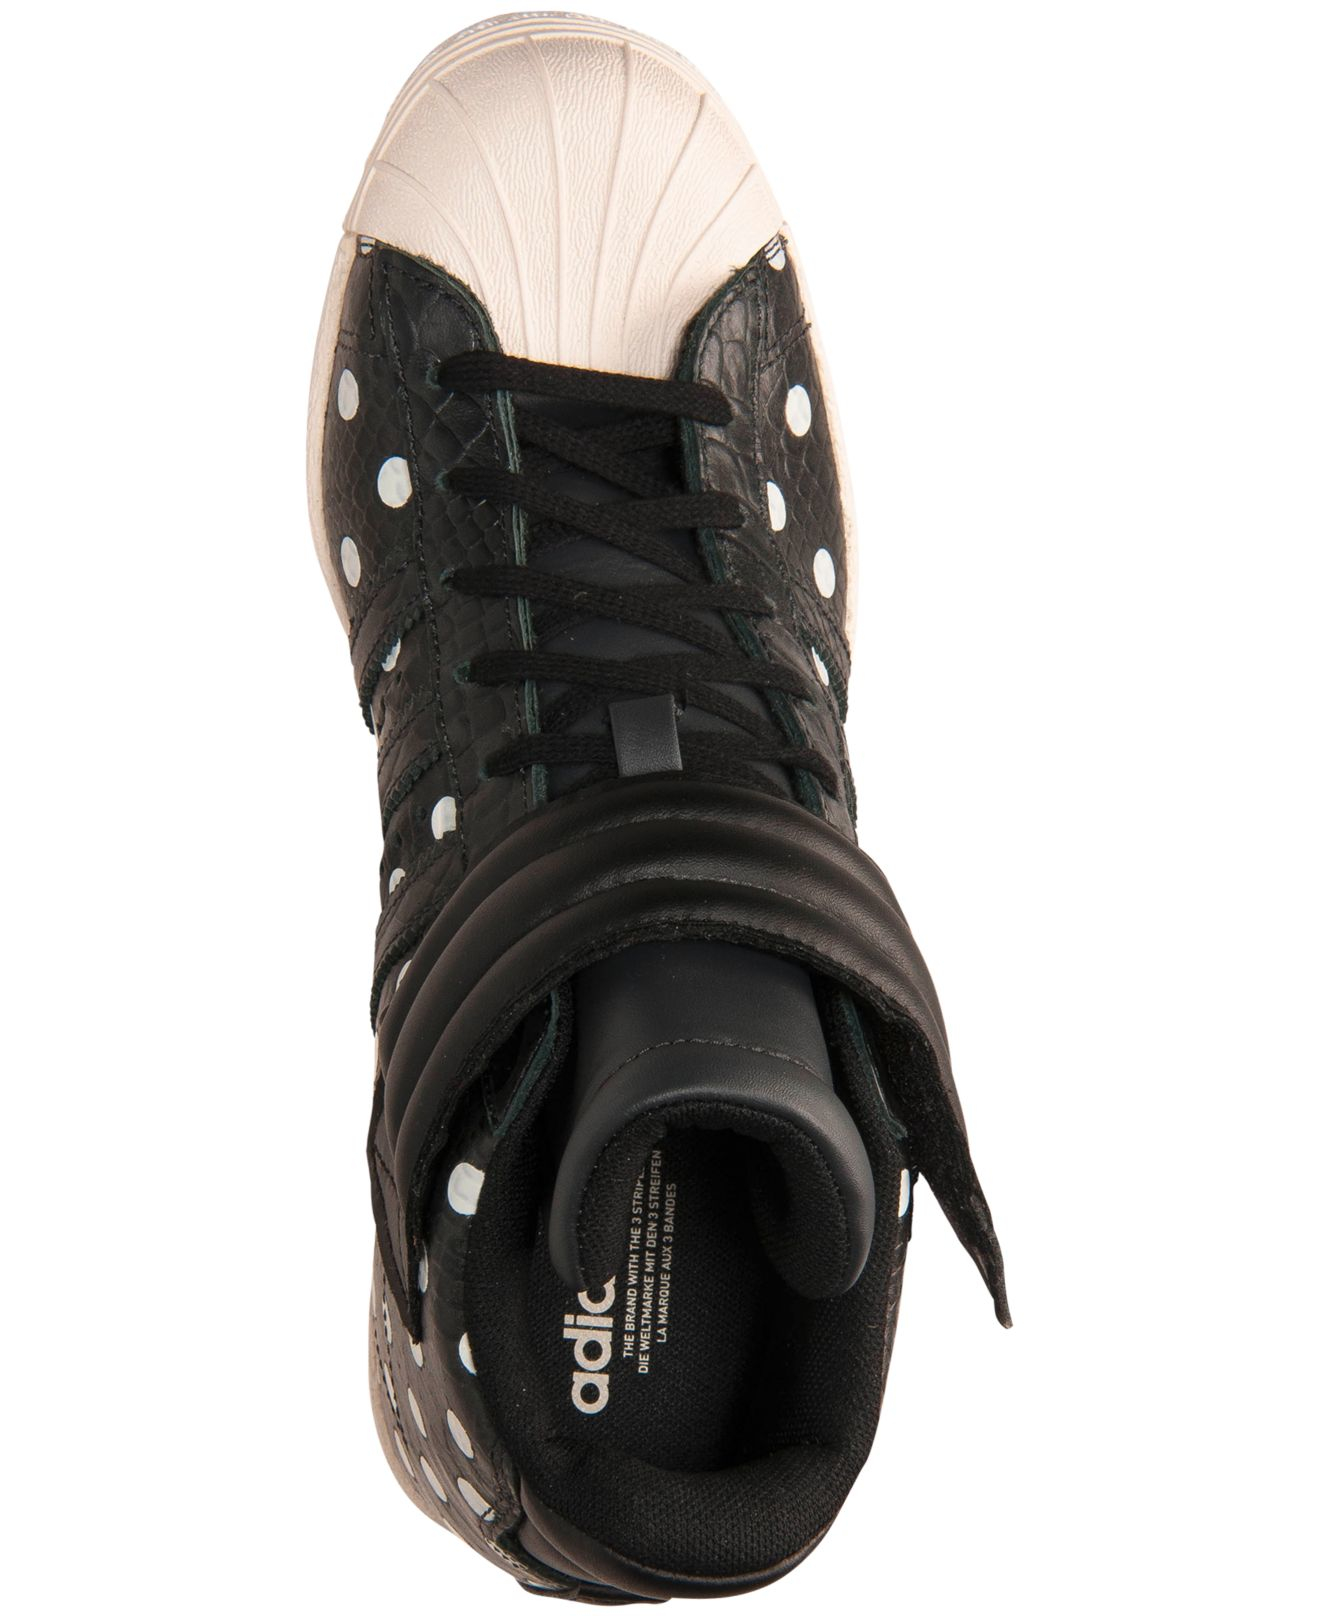 high quality Adidas Superstar Up Women's Shoes Core Black 